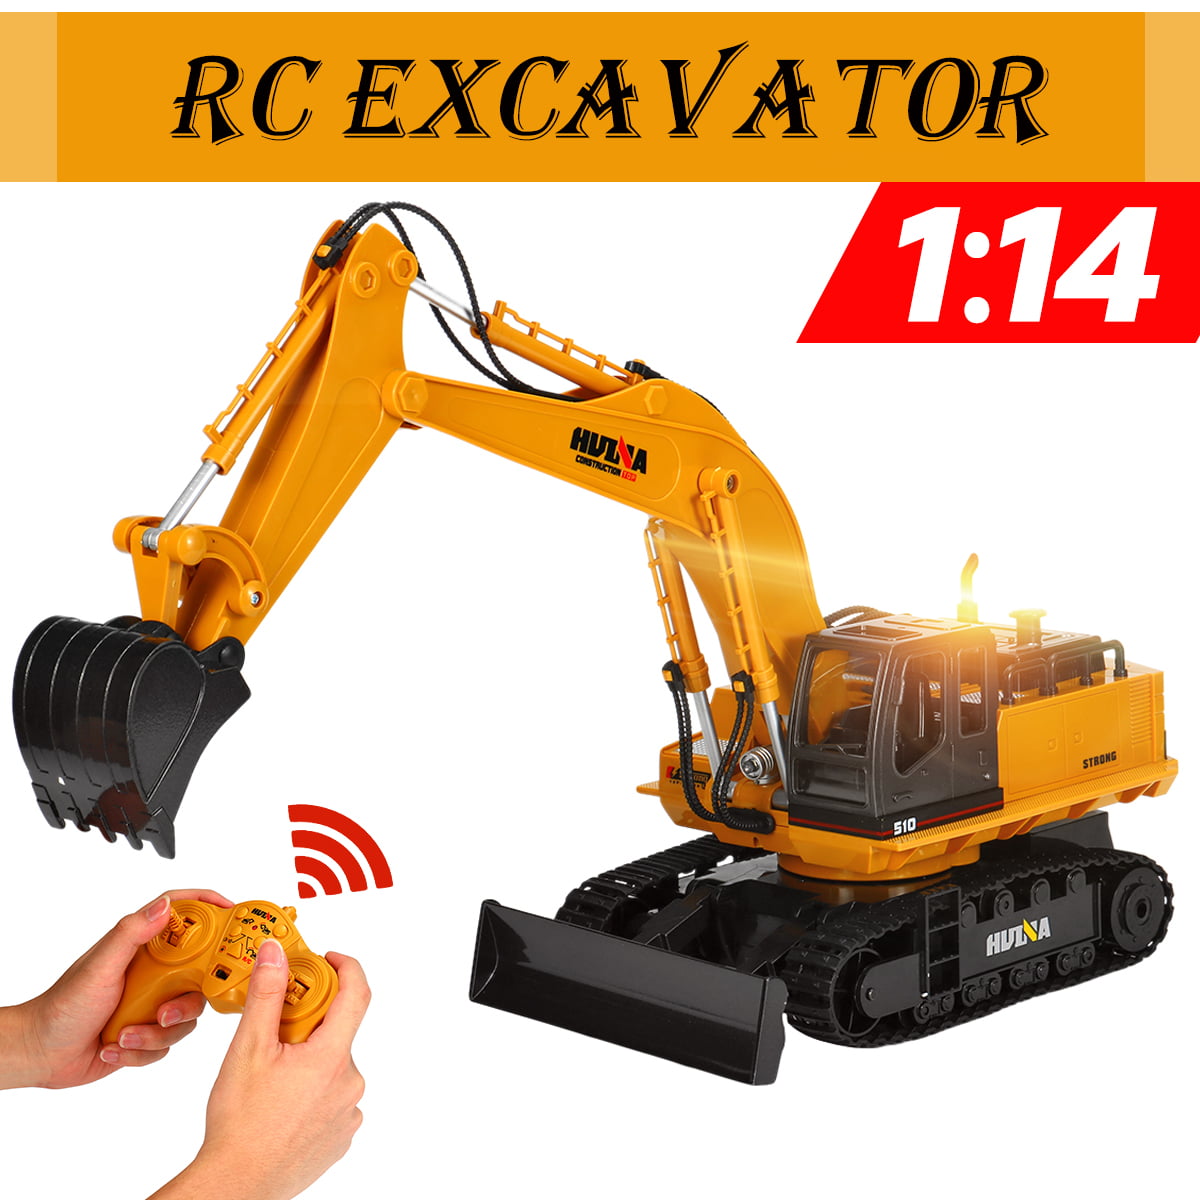 REMOTE CONTROL JCB TRUCK FULLY FUNCTION WITH LIGHT AND SOUND WIRELESS REMOTE TOY 